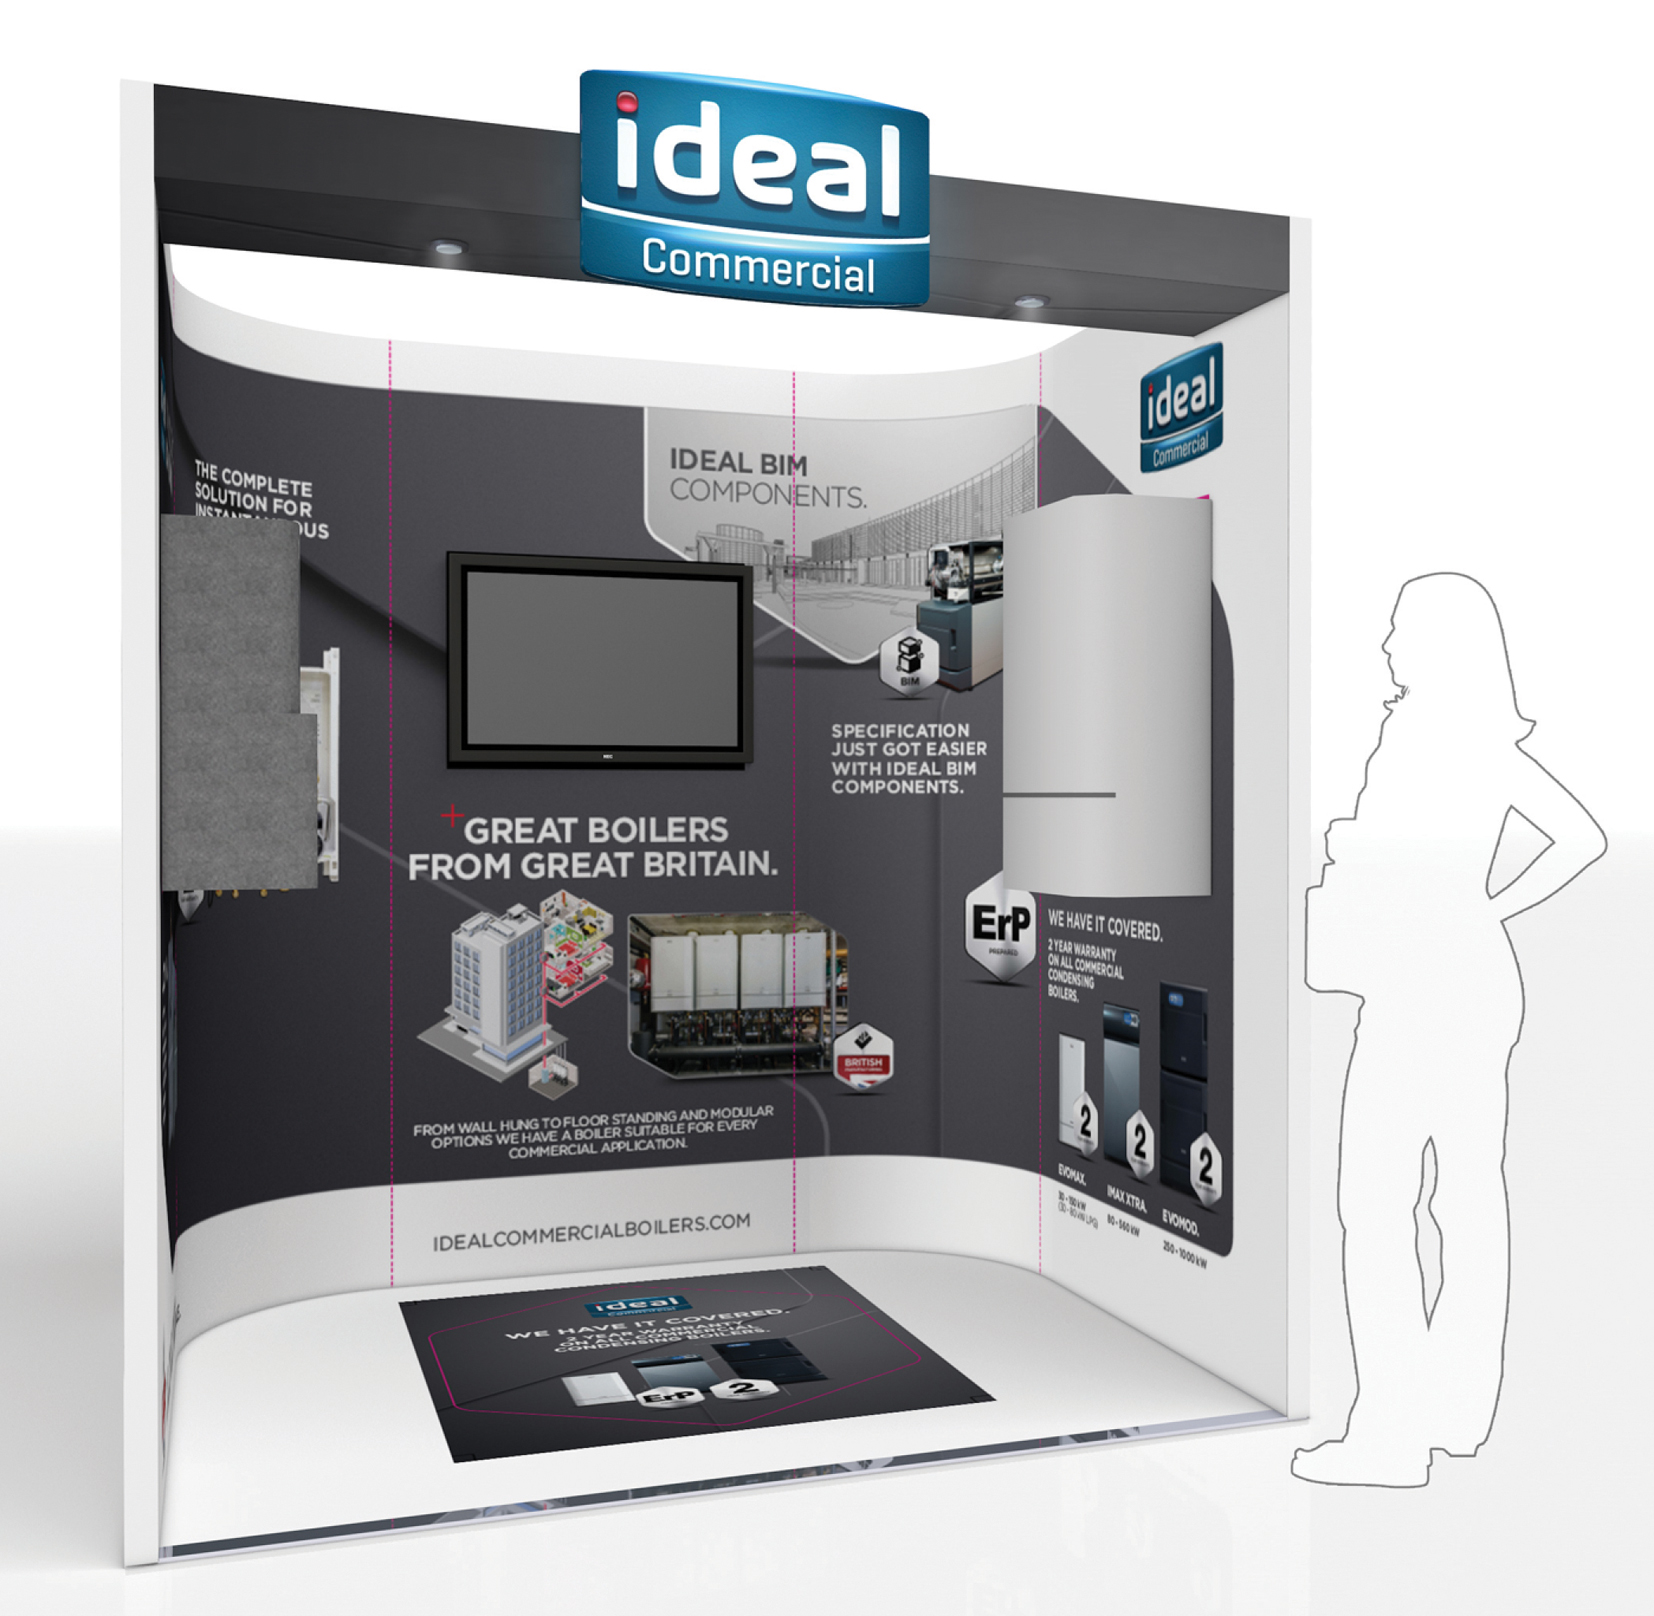 Ideal Commercial Boilers take centre stage